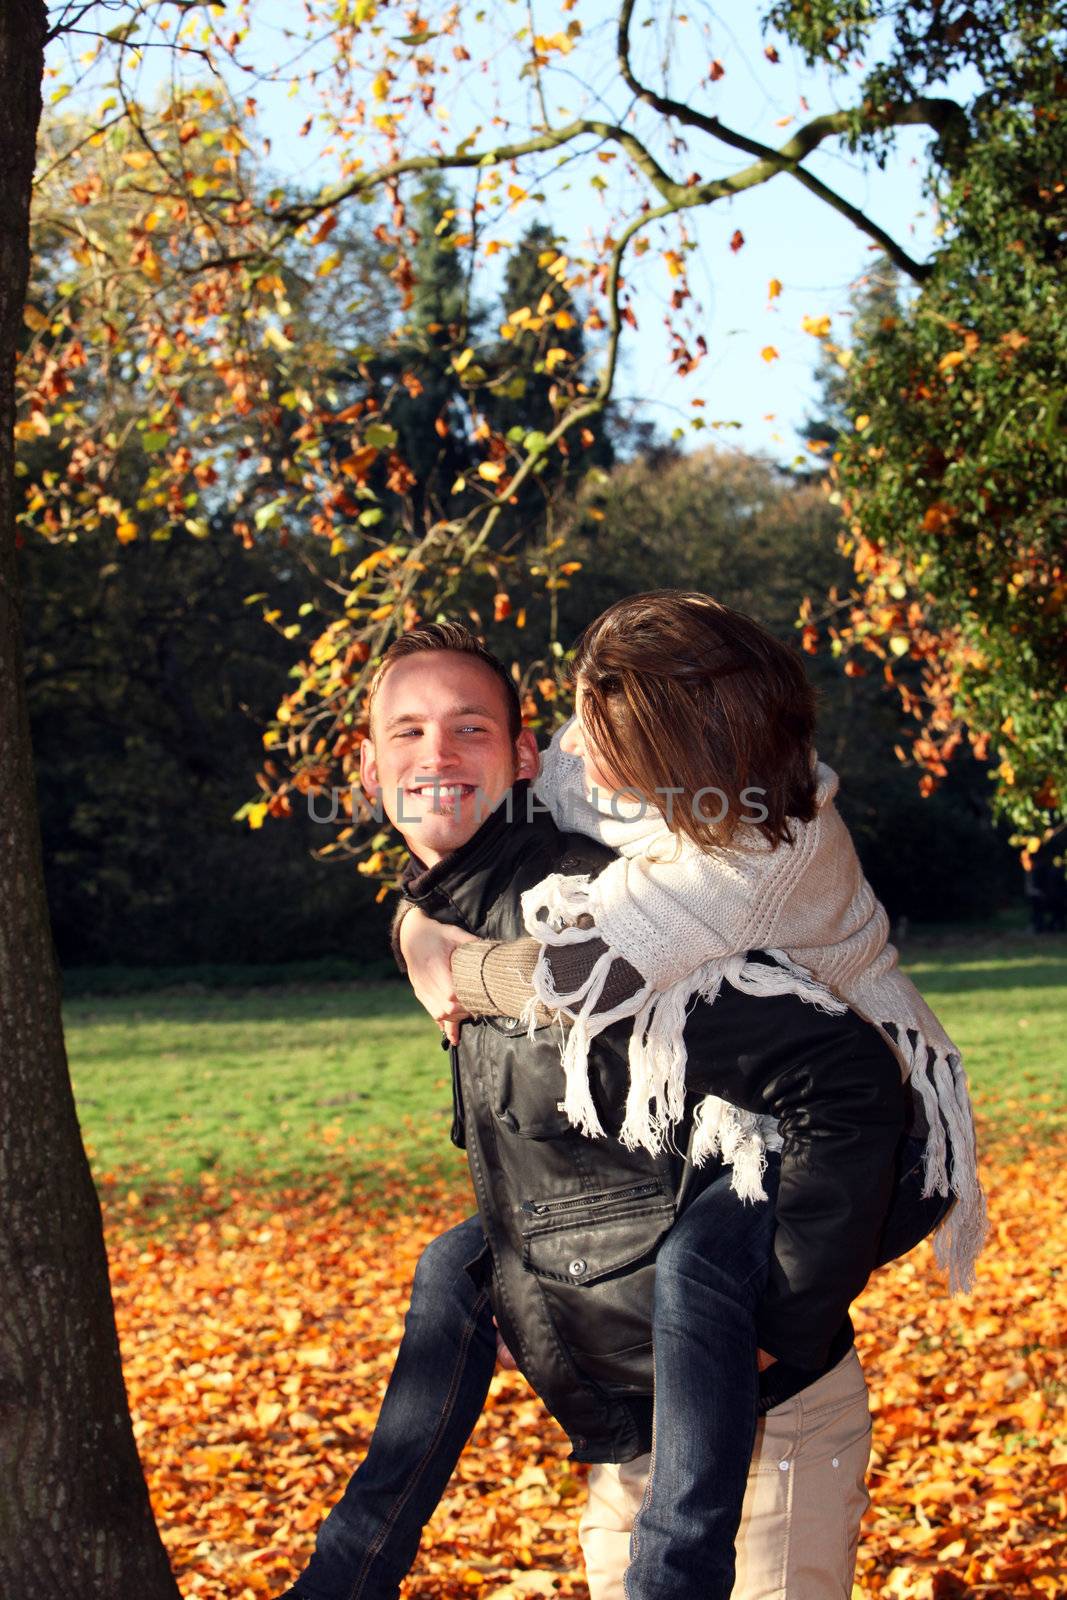 Handsome smiling young man giving his girlfriend a piggyback outdoors in the park against a backdrop of colourful autumn leaves